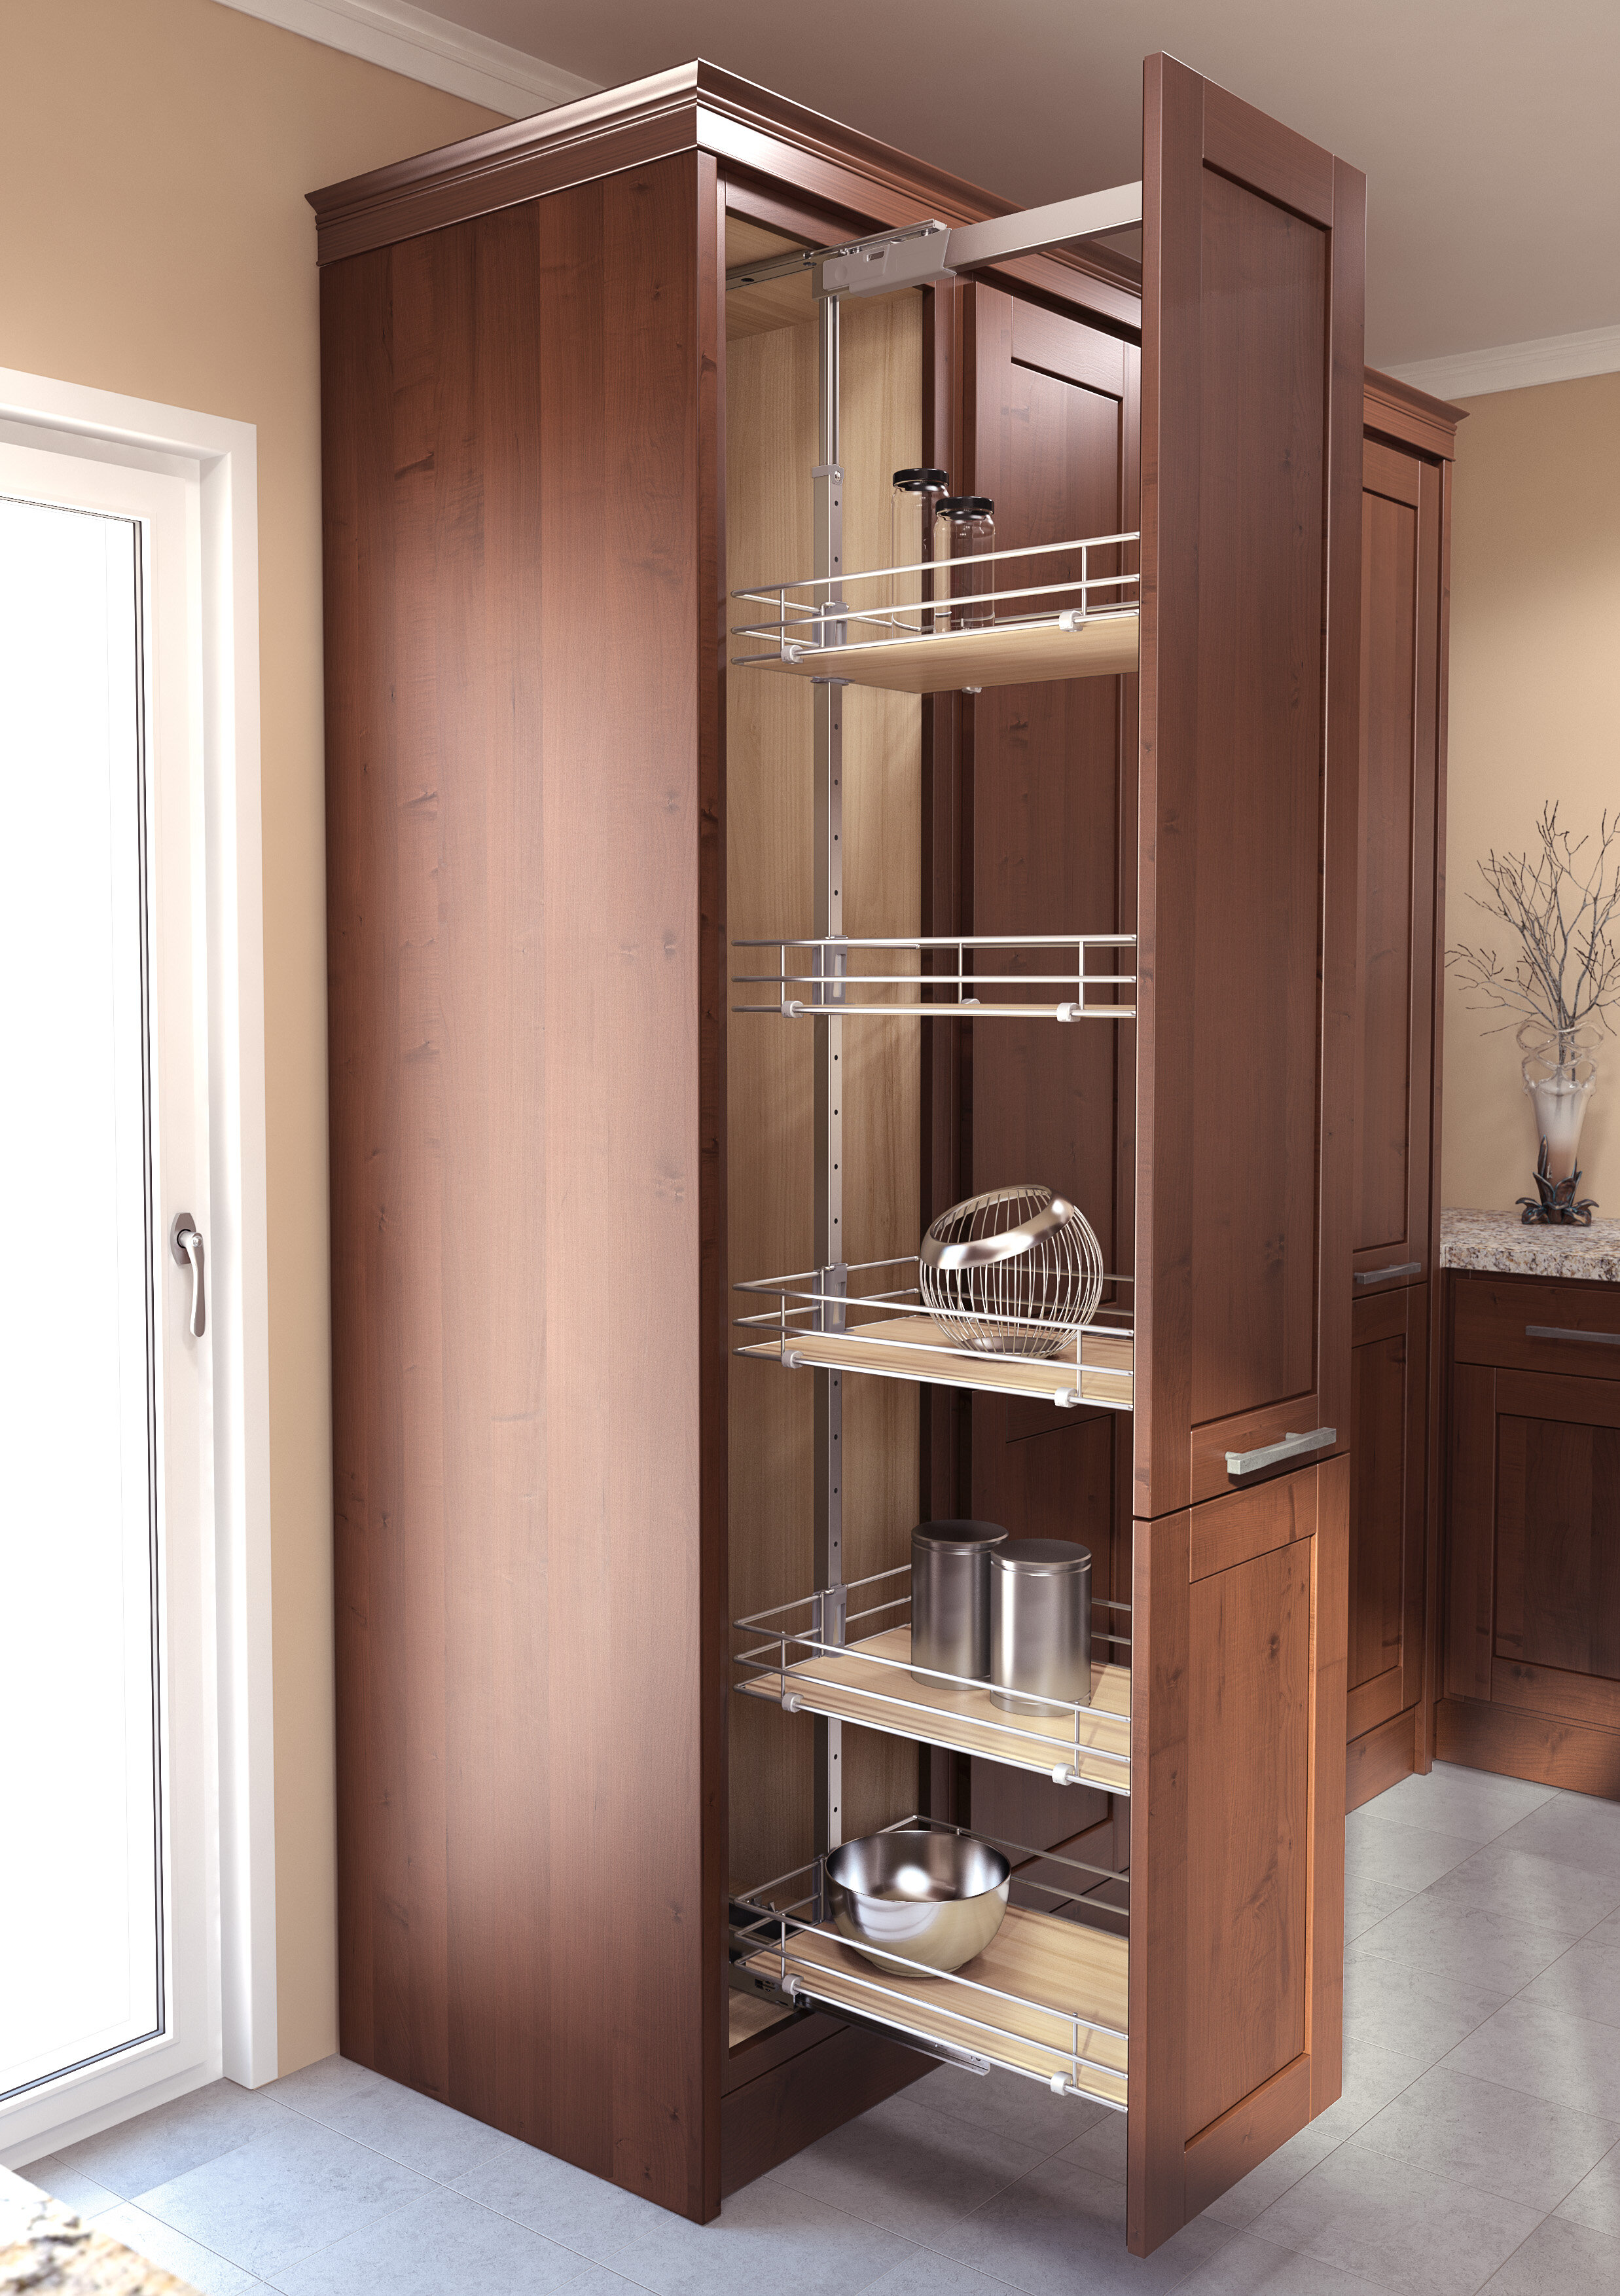 Painting Of Ikea Pull Out Pantry And Slide Out Pantry Which One